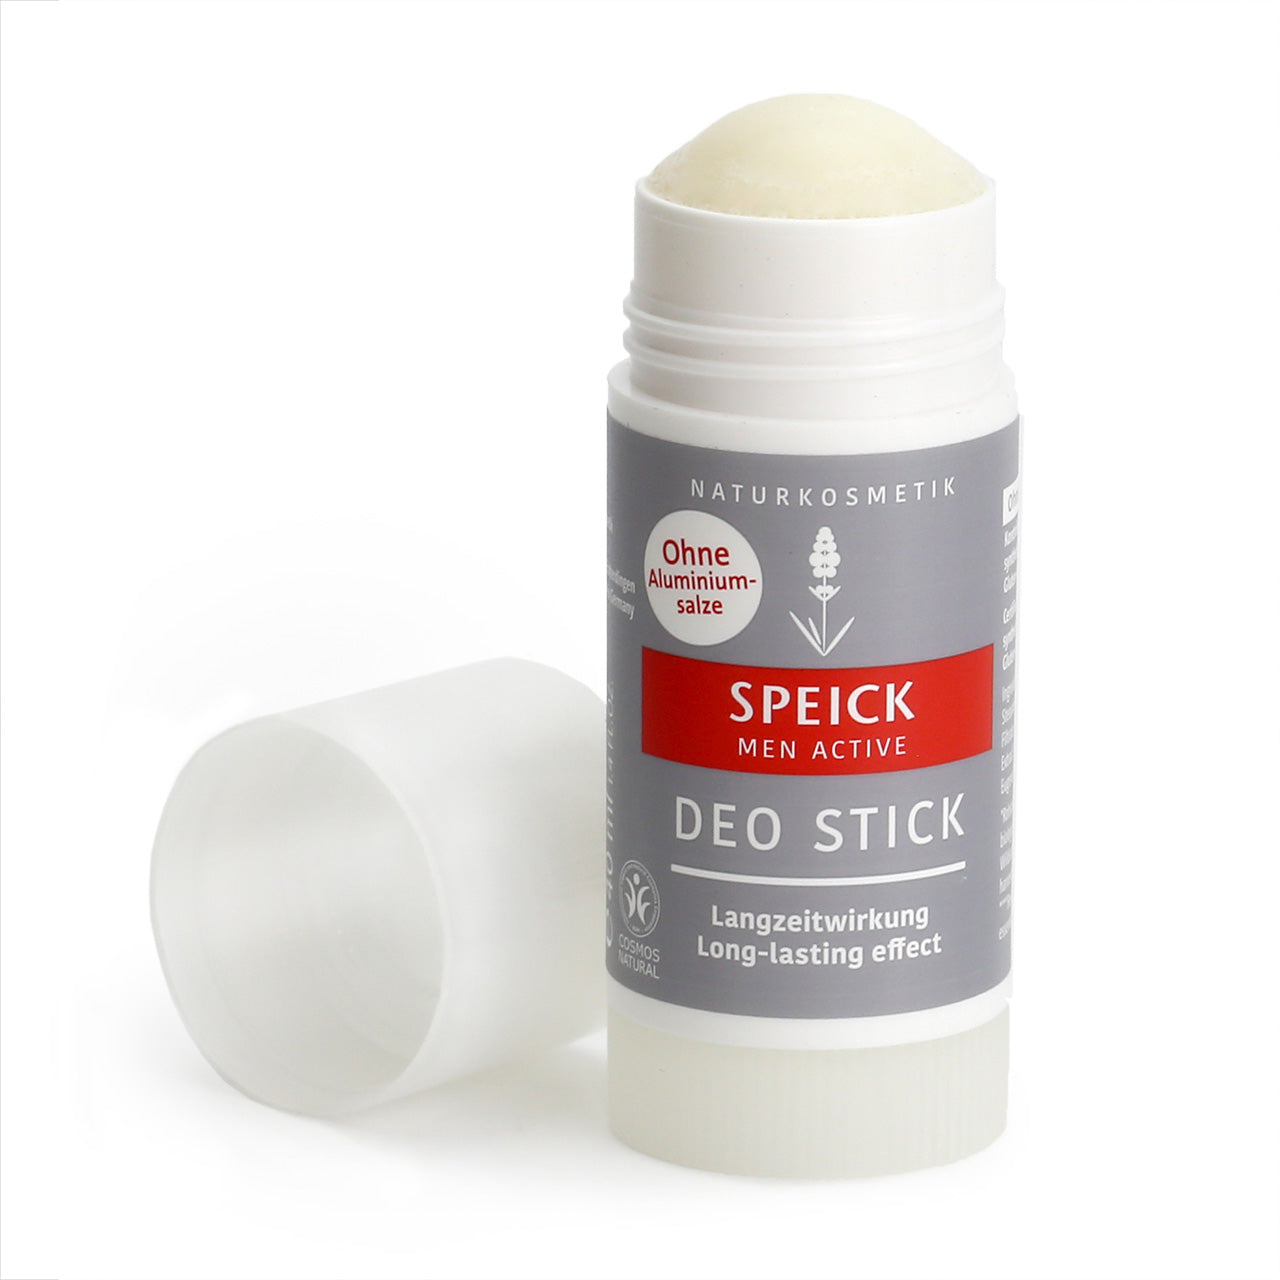 Speick Men Active Deo Stick with grey label and white logo on a red encircling band